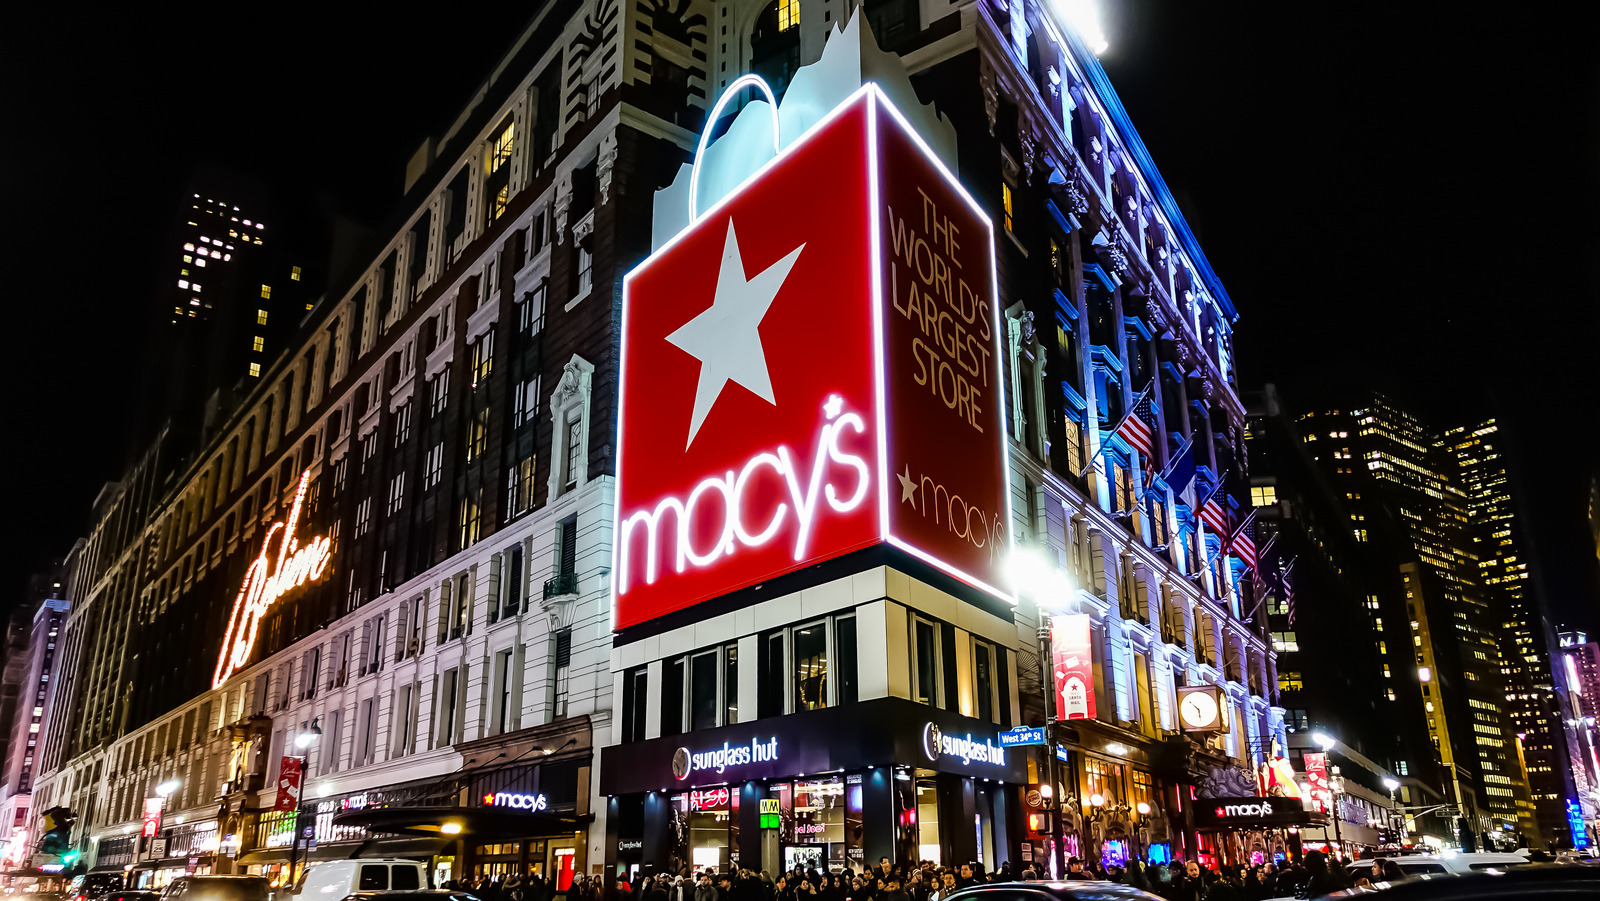 Bigger than Macy's? The World's Largest Department Store